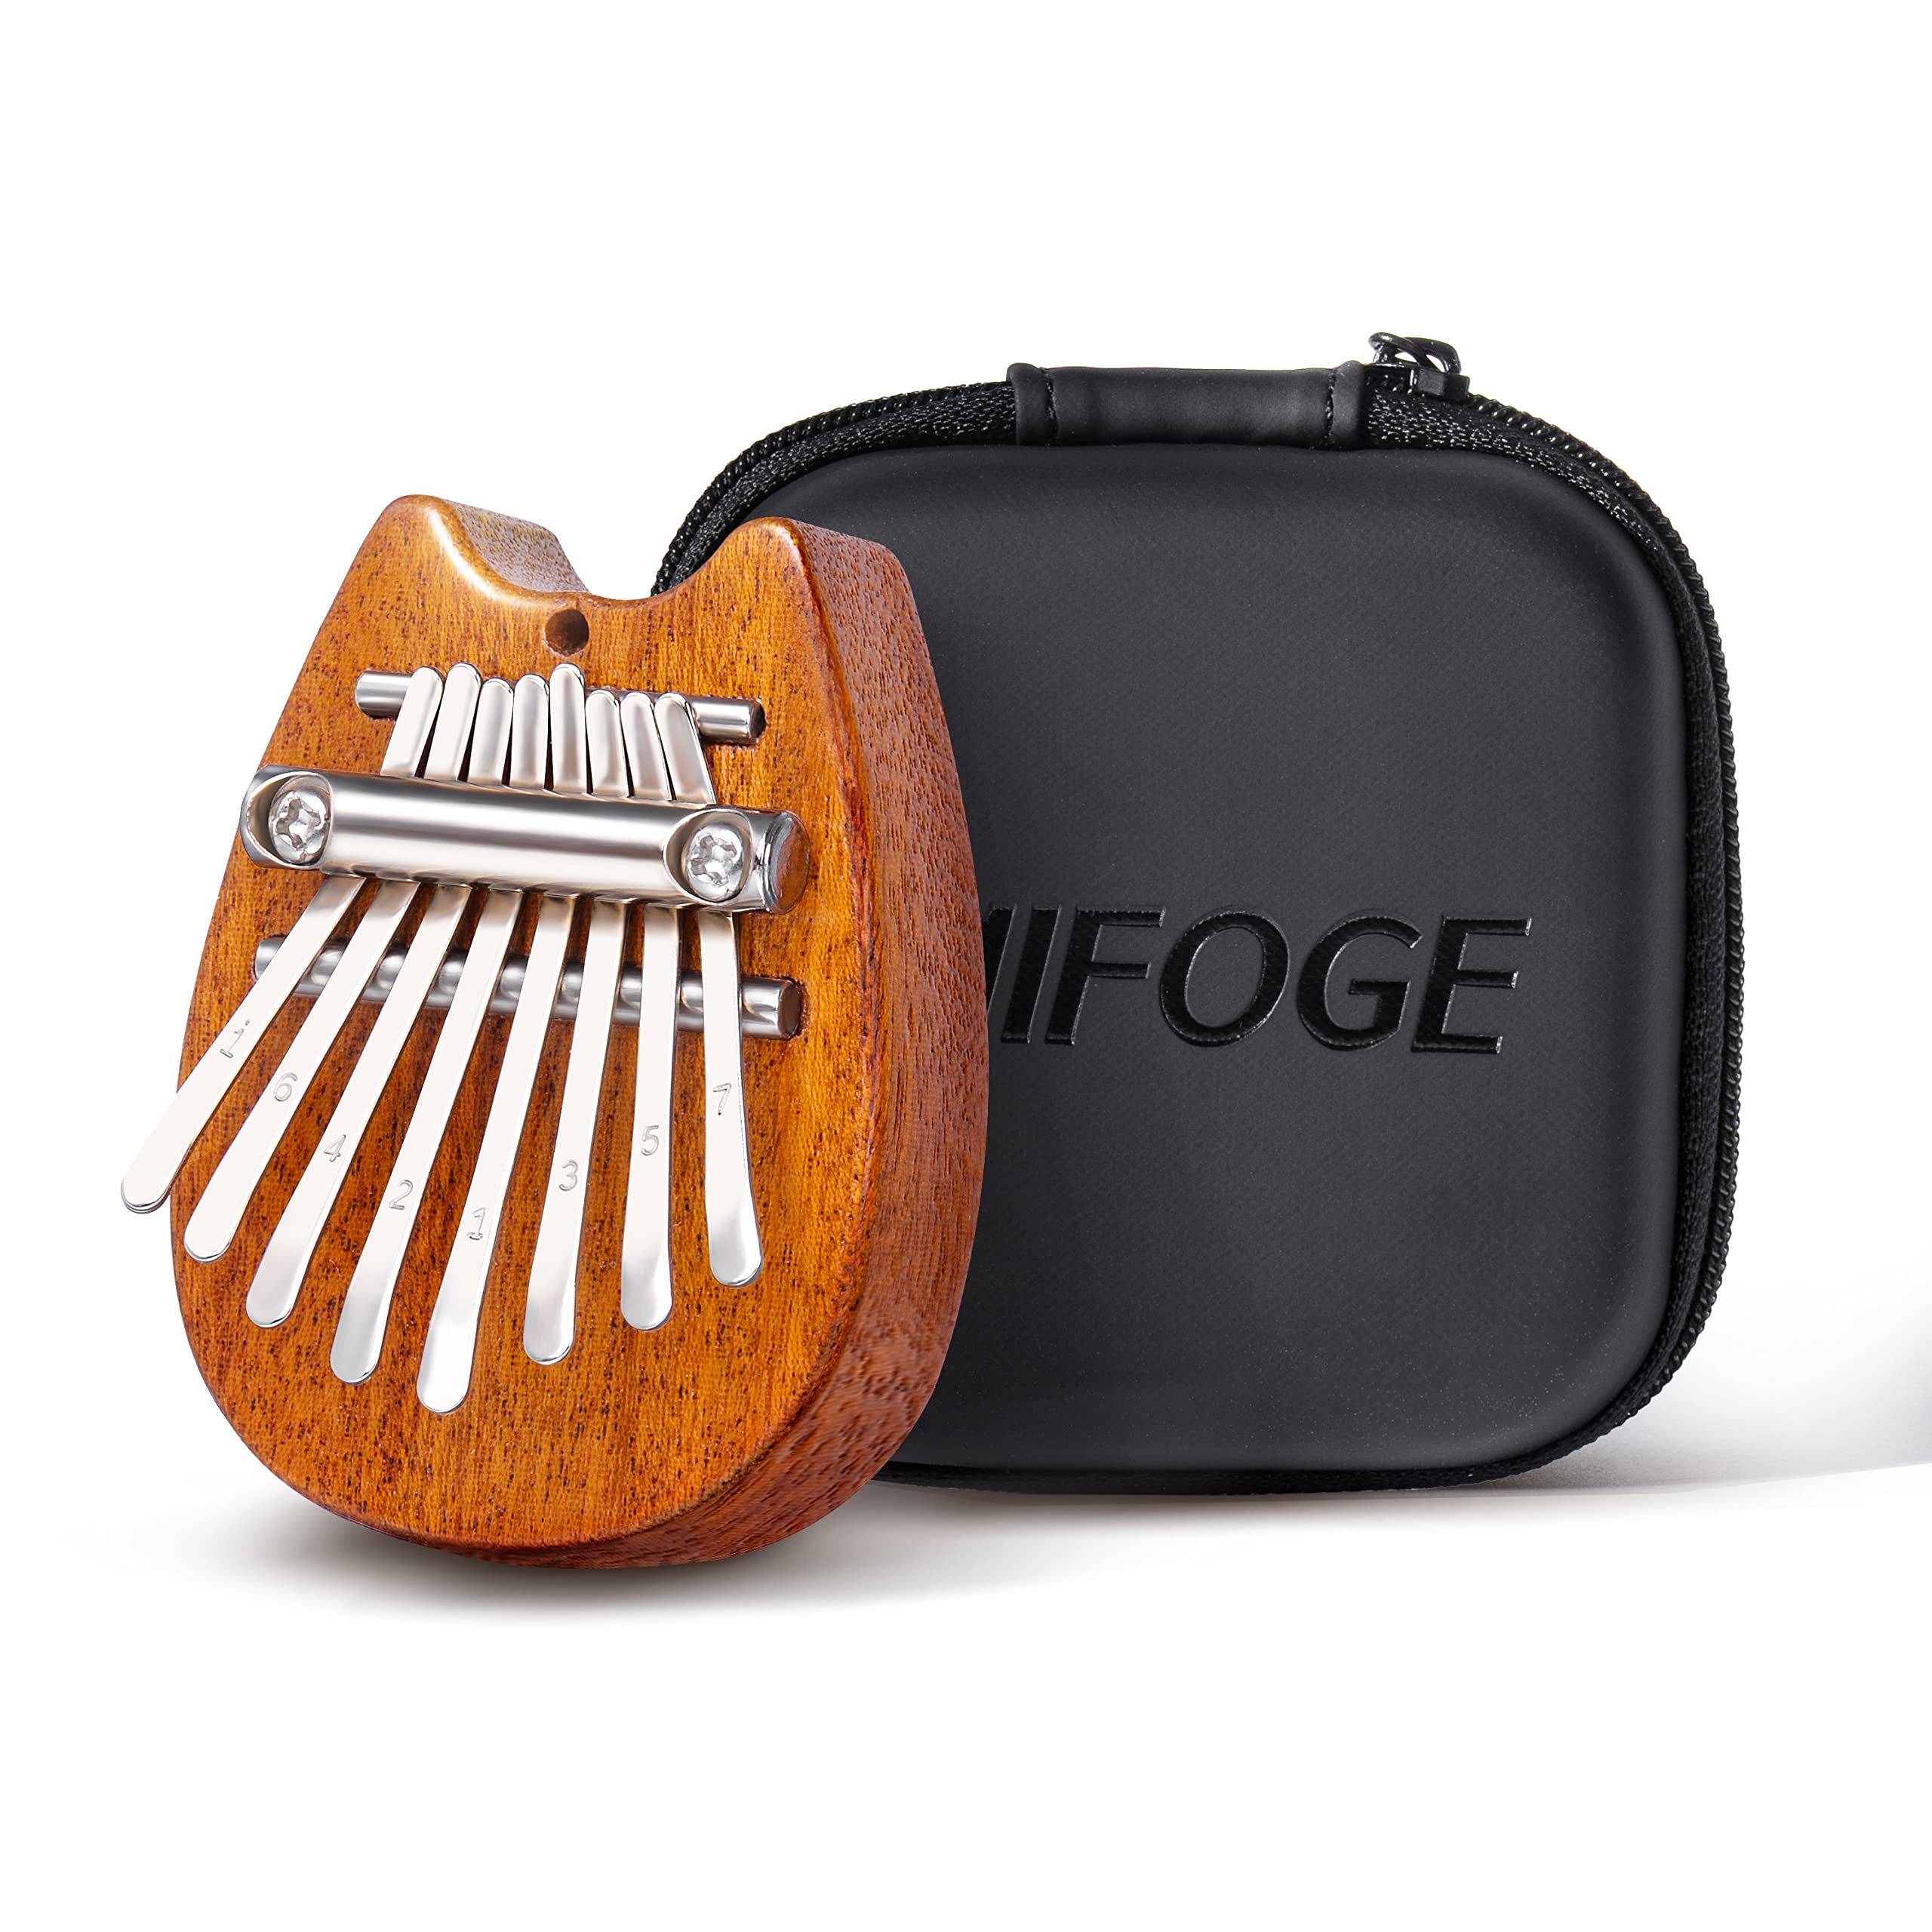 Mifoge mini kalimba thumb piano keys woodenexquisite finger piano with lanyard waterproof protective boxmusical instrumentgift for toddler kid child valentines adult beginners musical instruments